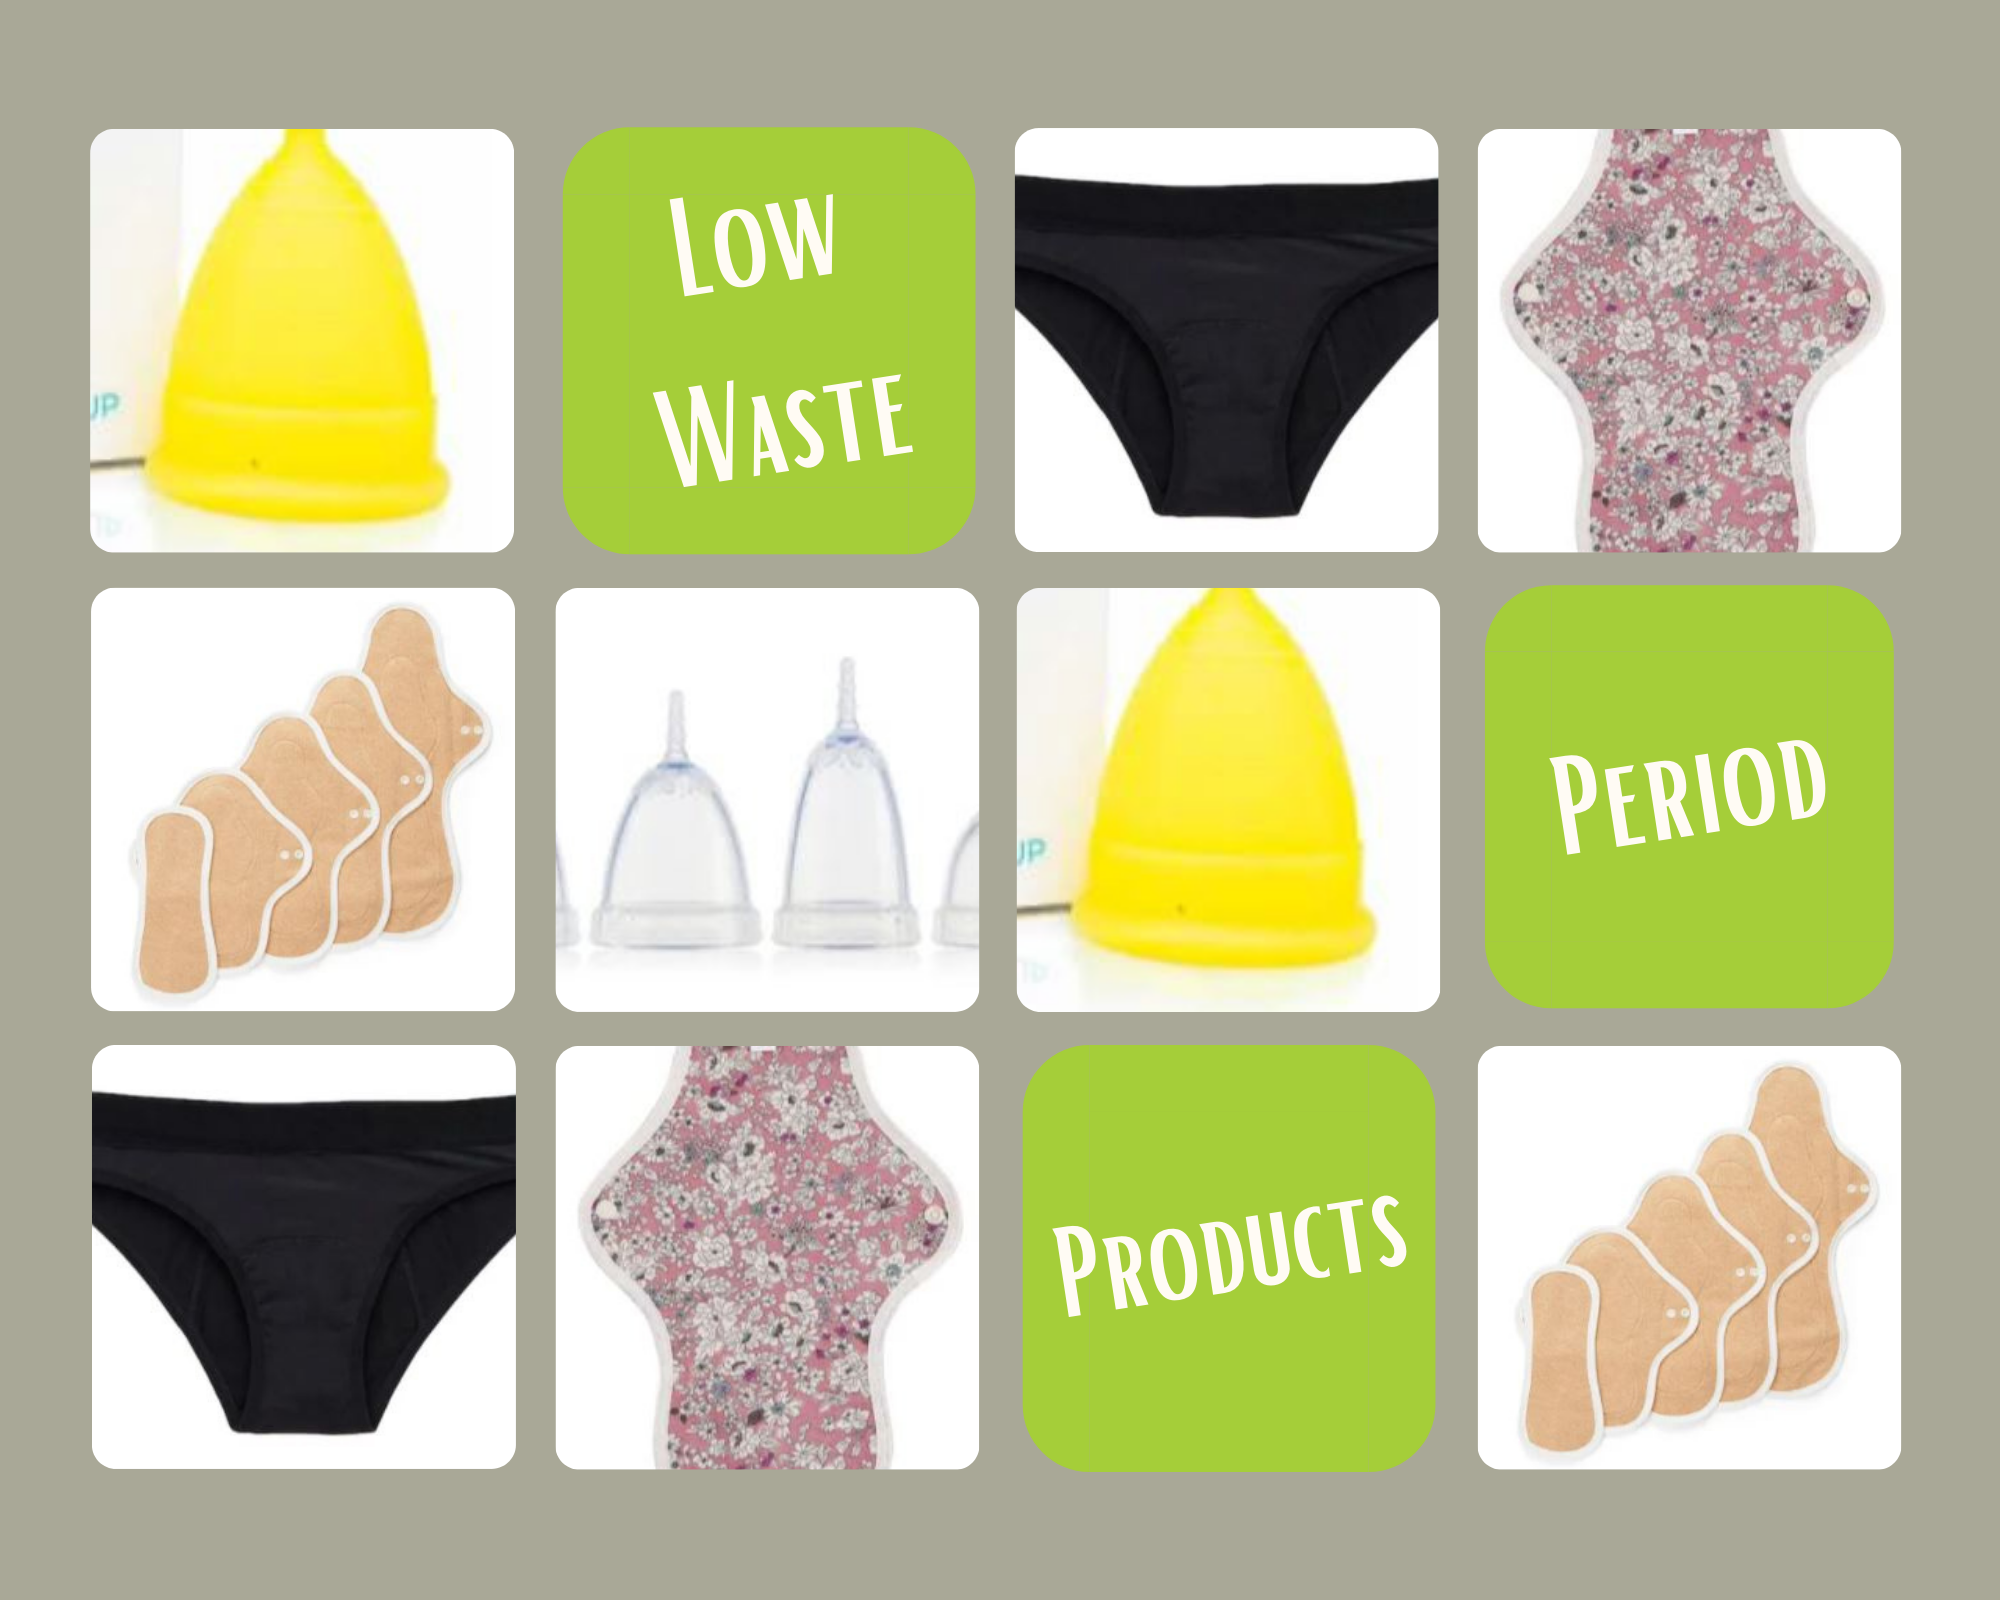 A guide to low waste period products